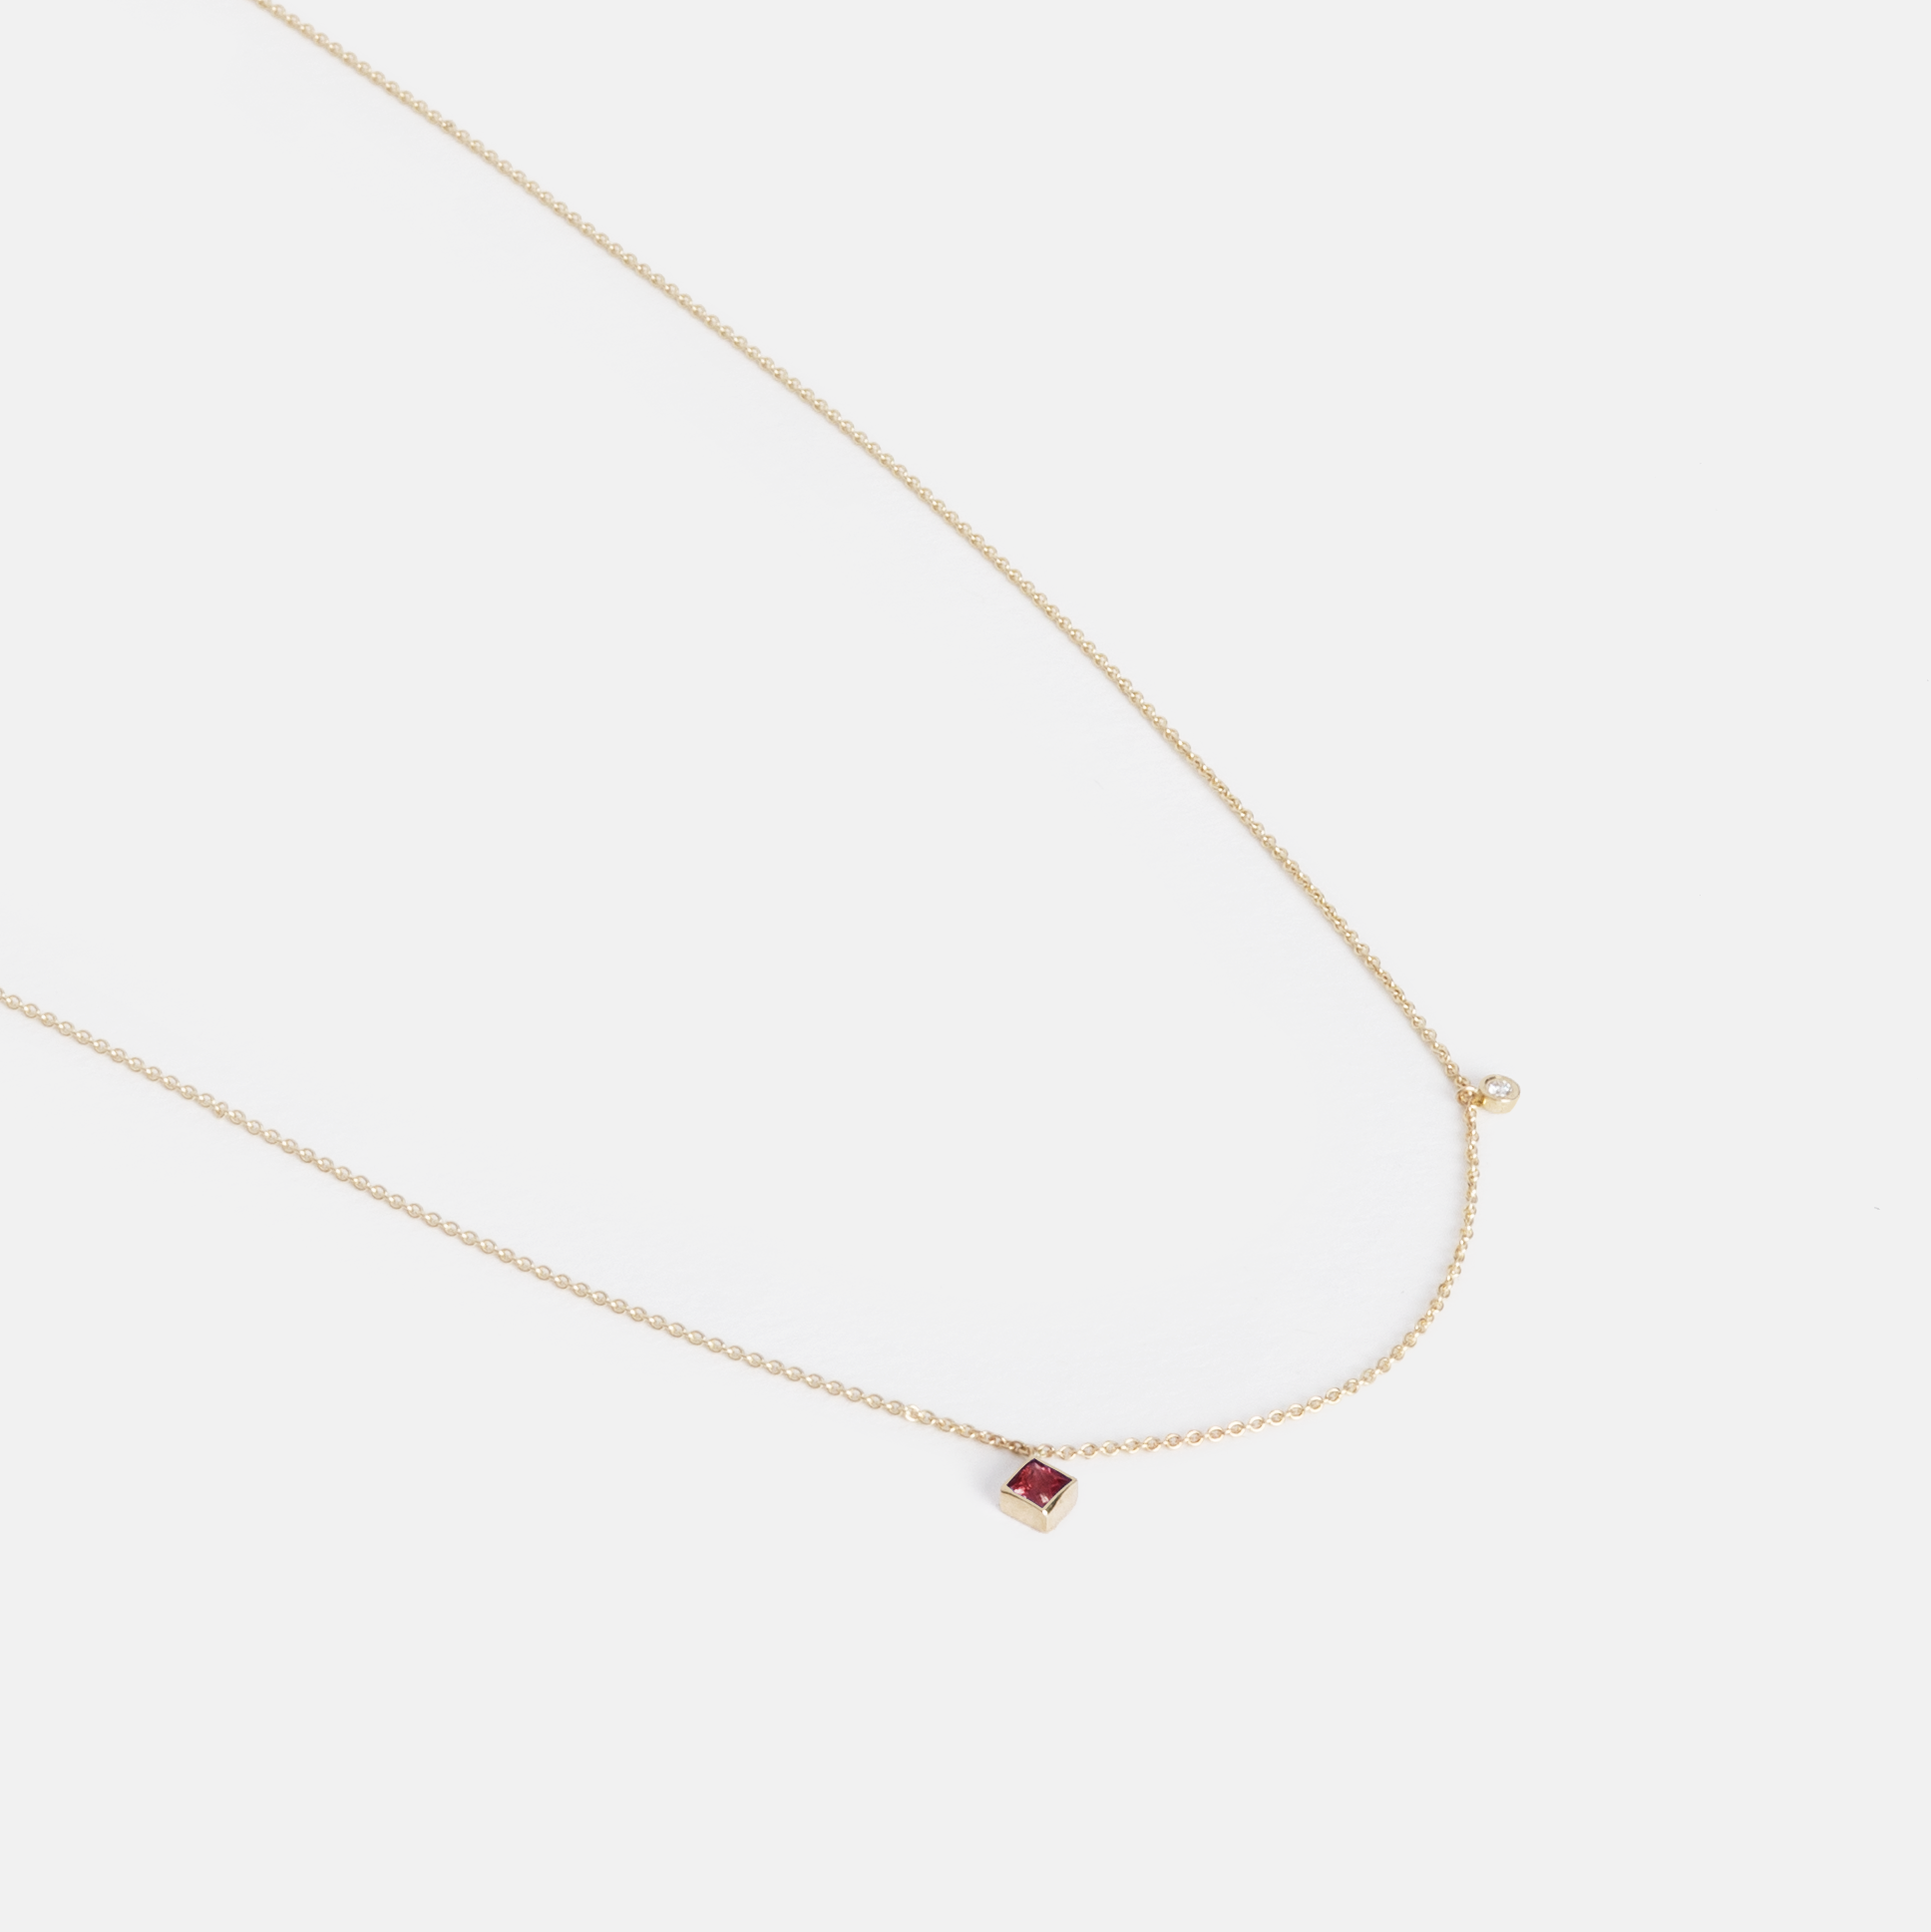 Ibi Cool Necklace in 14k Gold set with Ruby and White Diamond By SHW Fine Jewelry NYC